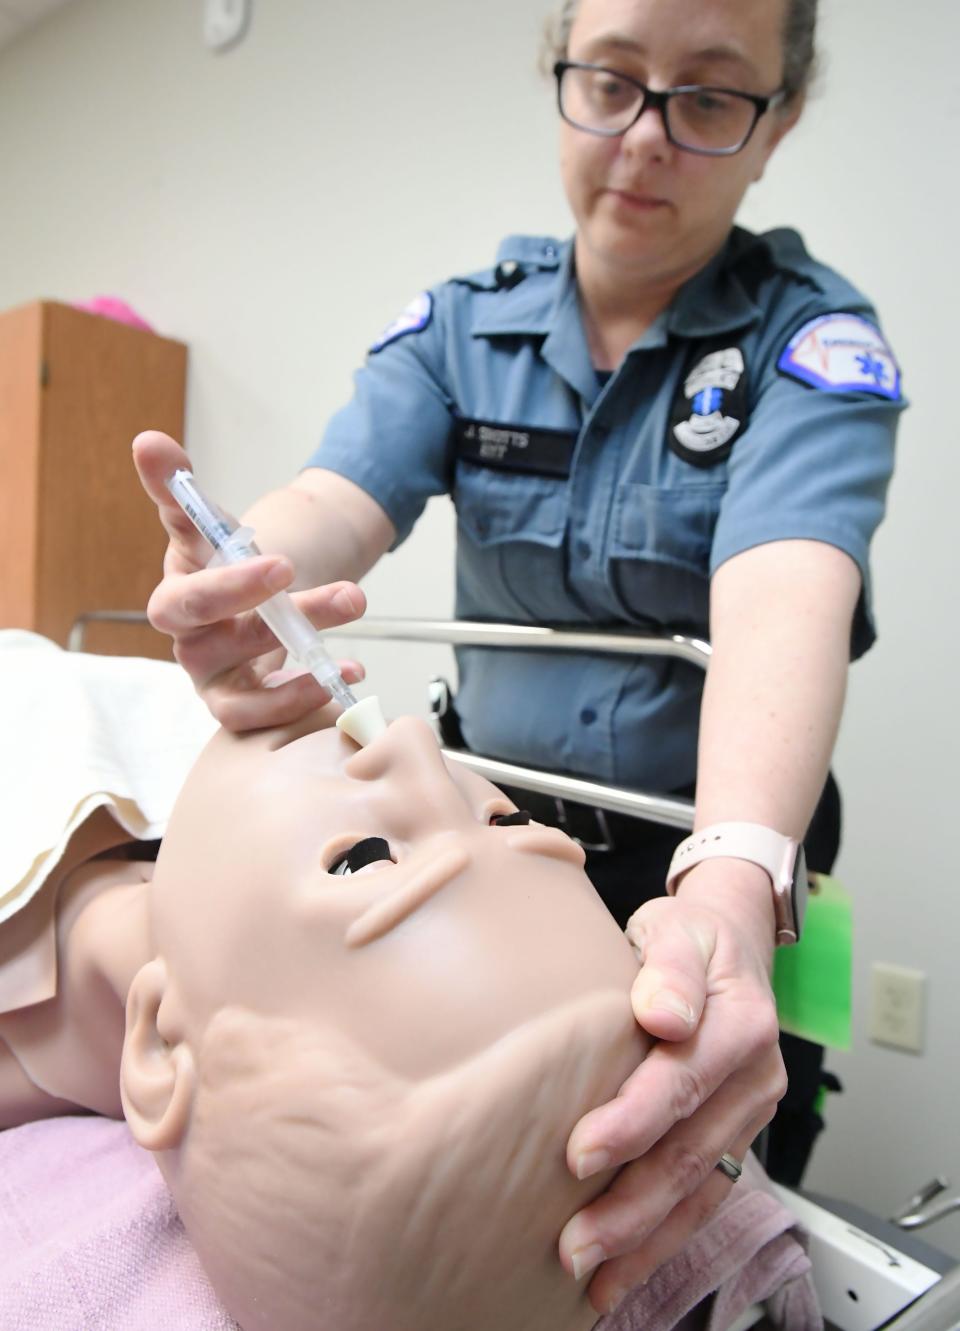 EmergyCare EMT Julie Shotts demonstrates the typical use of Narcan, two squirts in each nostril for a patient who doesn't appear to be breathing, in a training area at EmergyCare in Erie.